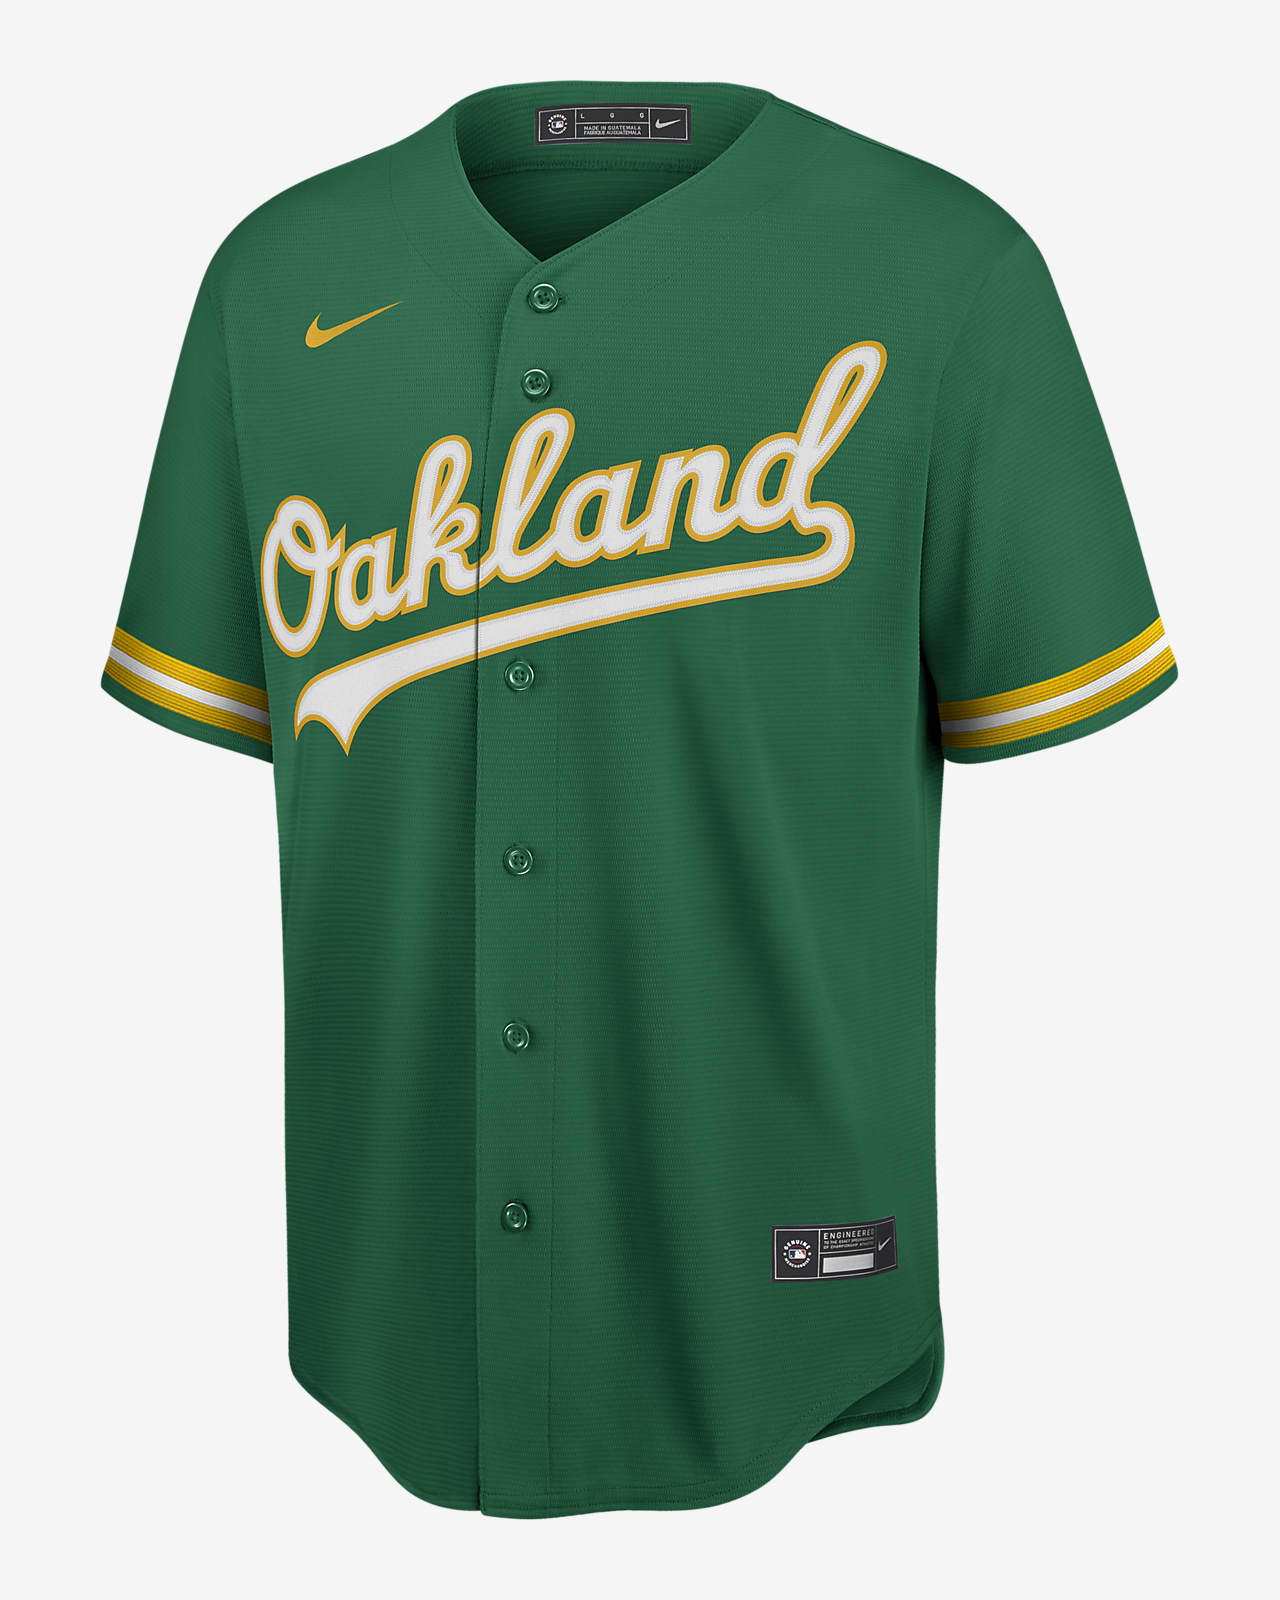 oakland a's youth jersey Cheap Sell - OFF 69%